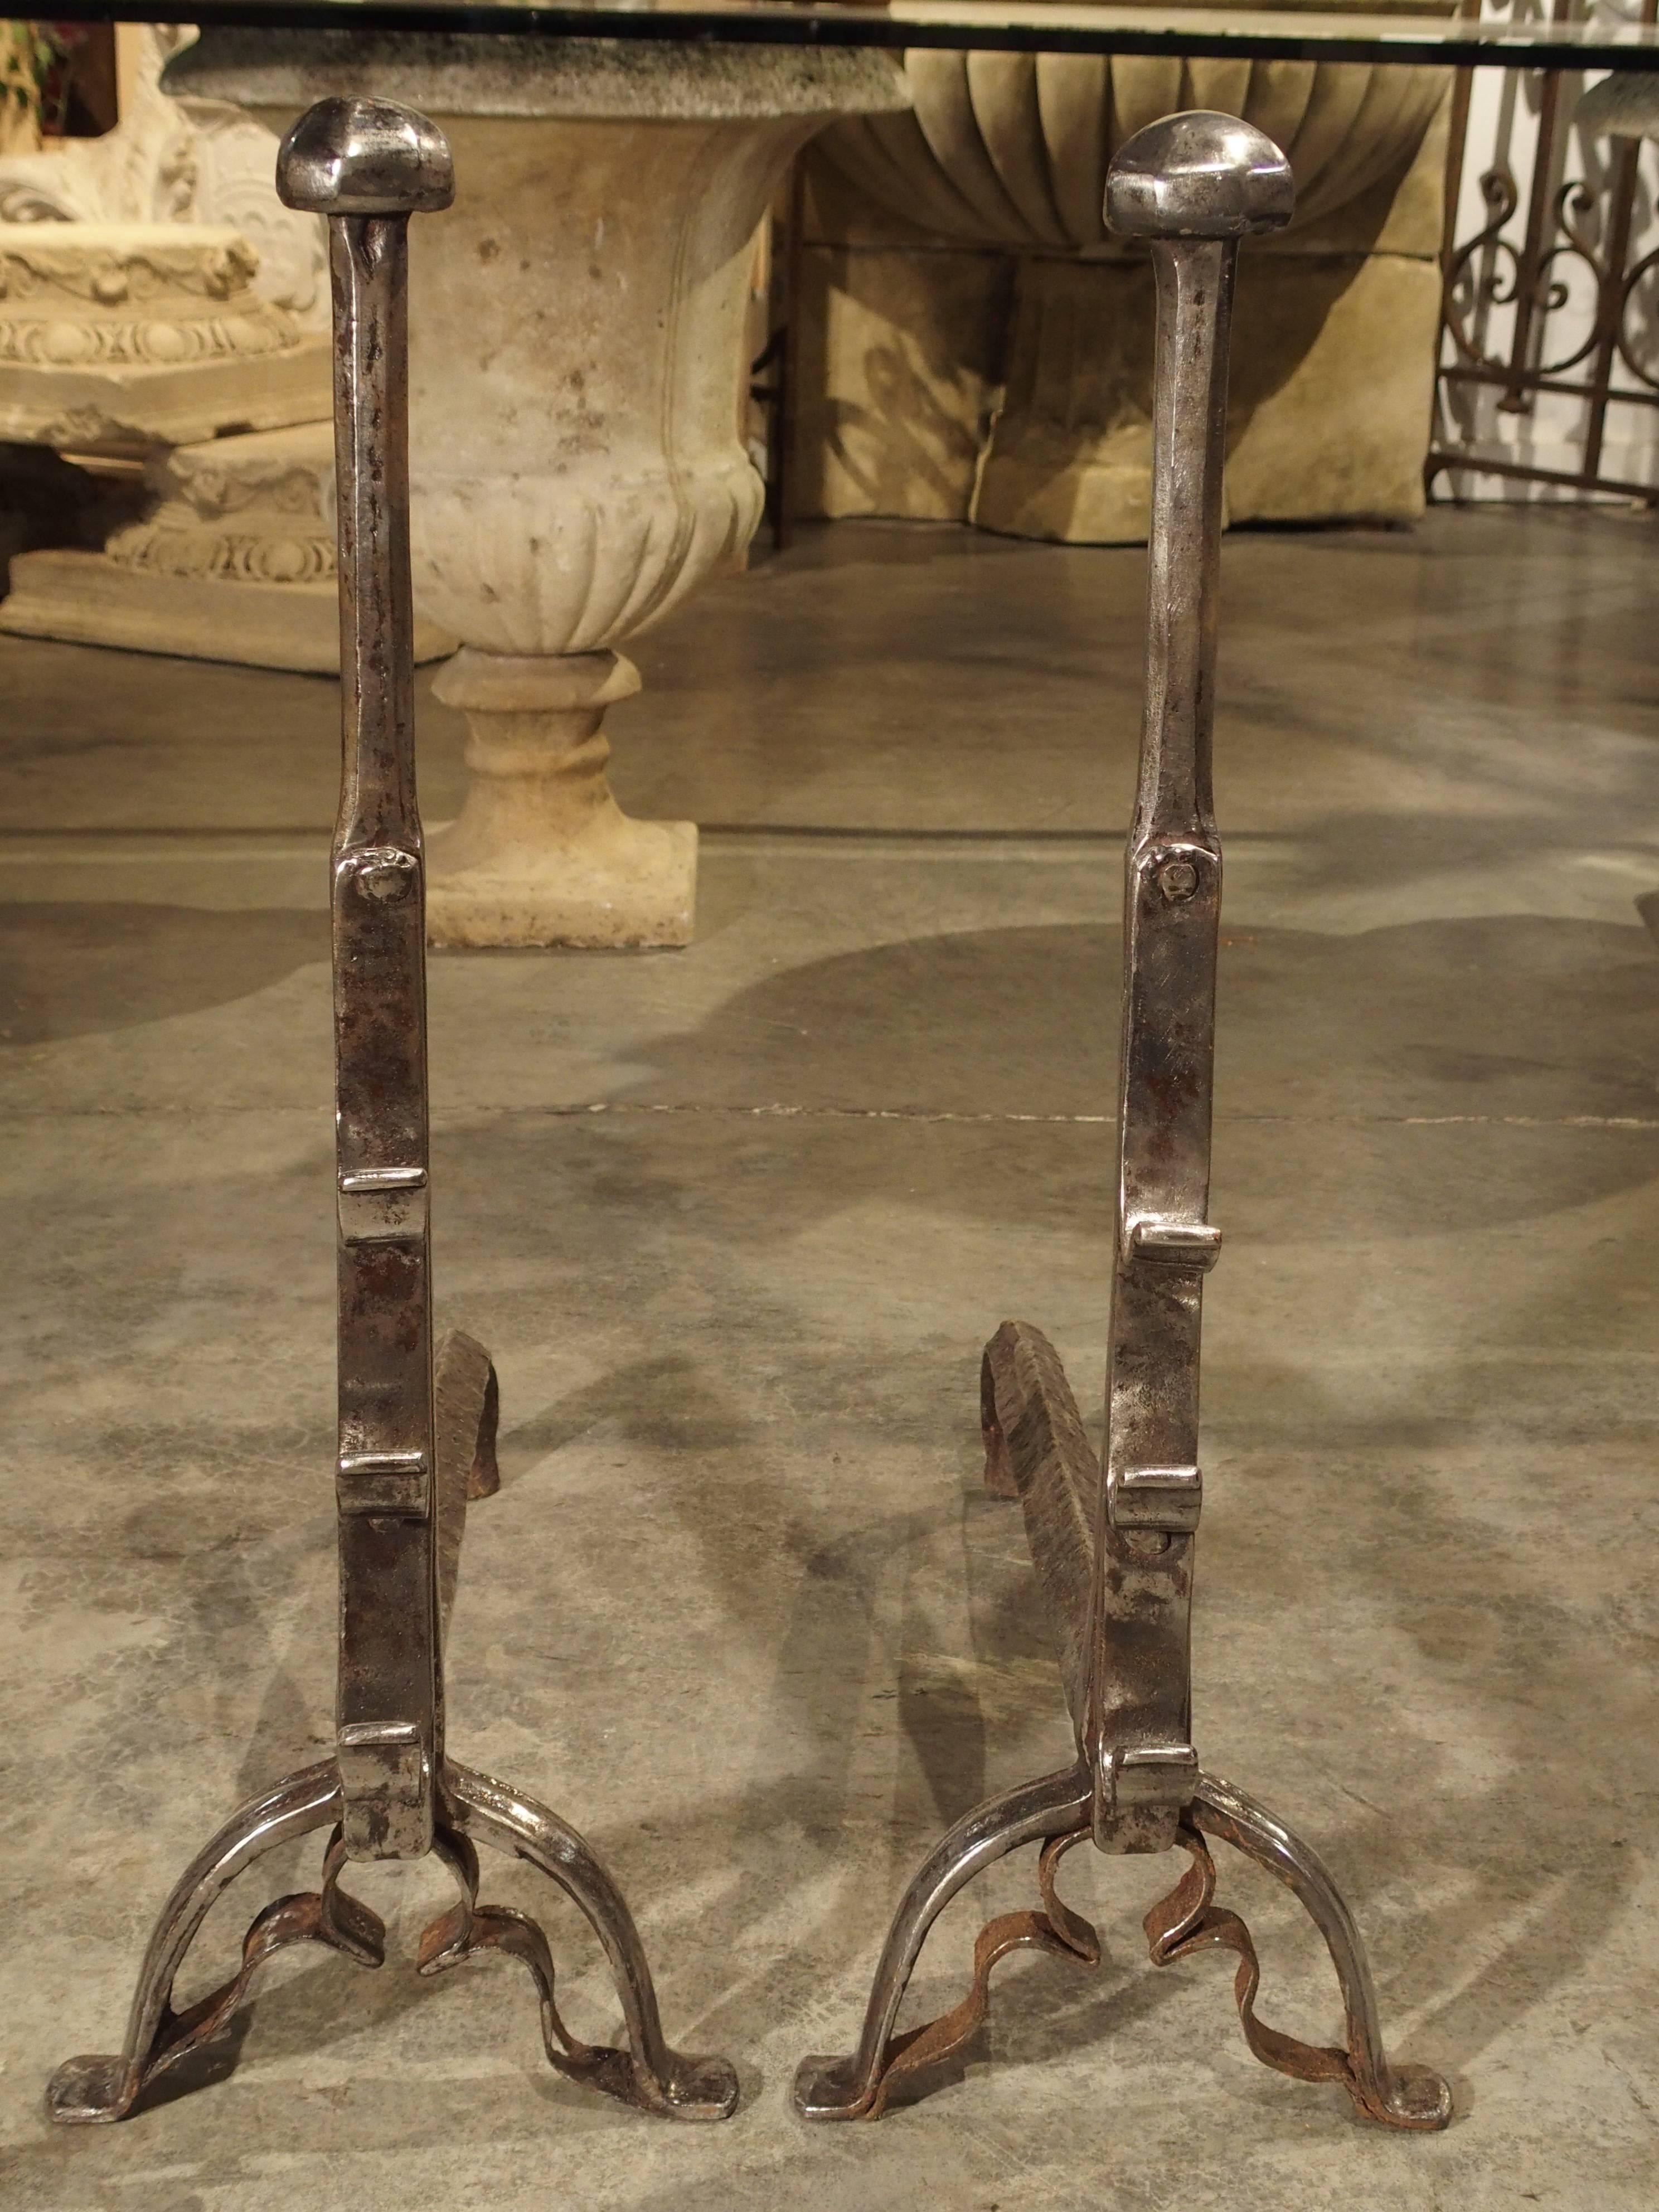 These artistically hand-wrought and hammered, 17th century andirons can be used in any style of design because of their elegantly simplicity. They have recently been lightly brushed and waxed with a clear paste wax, which gives them a beautiful